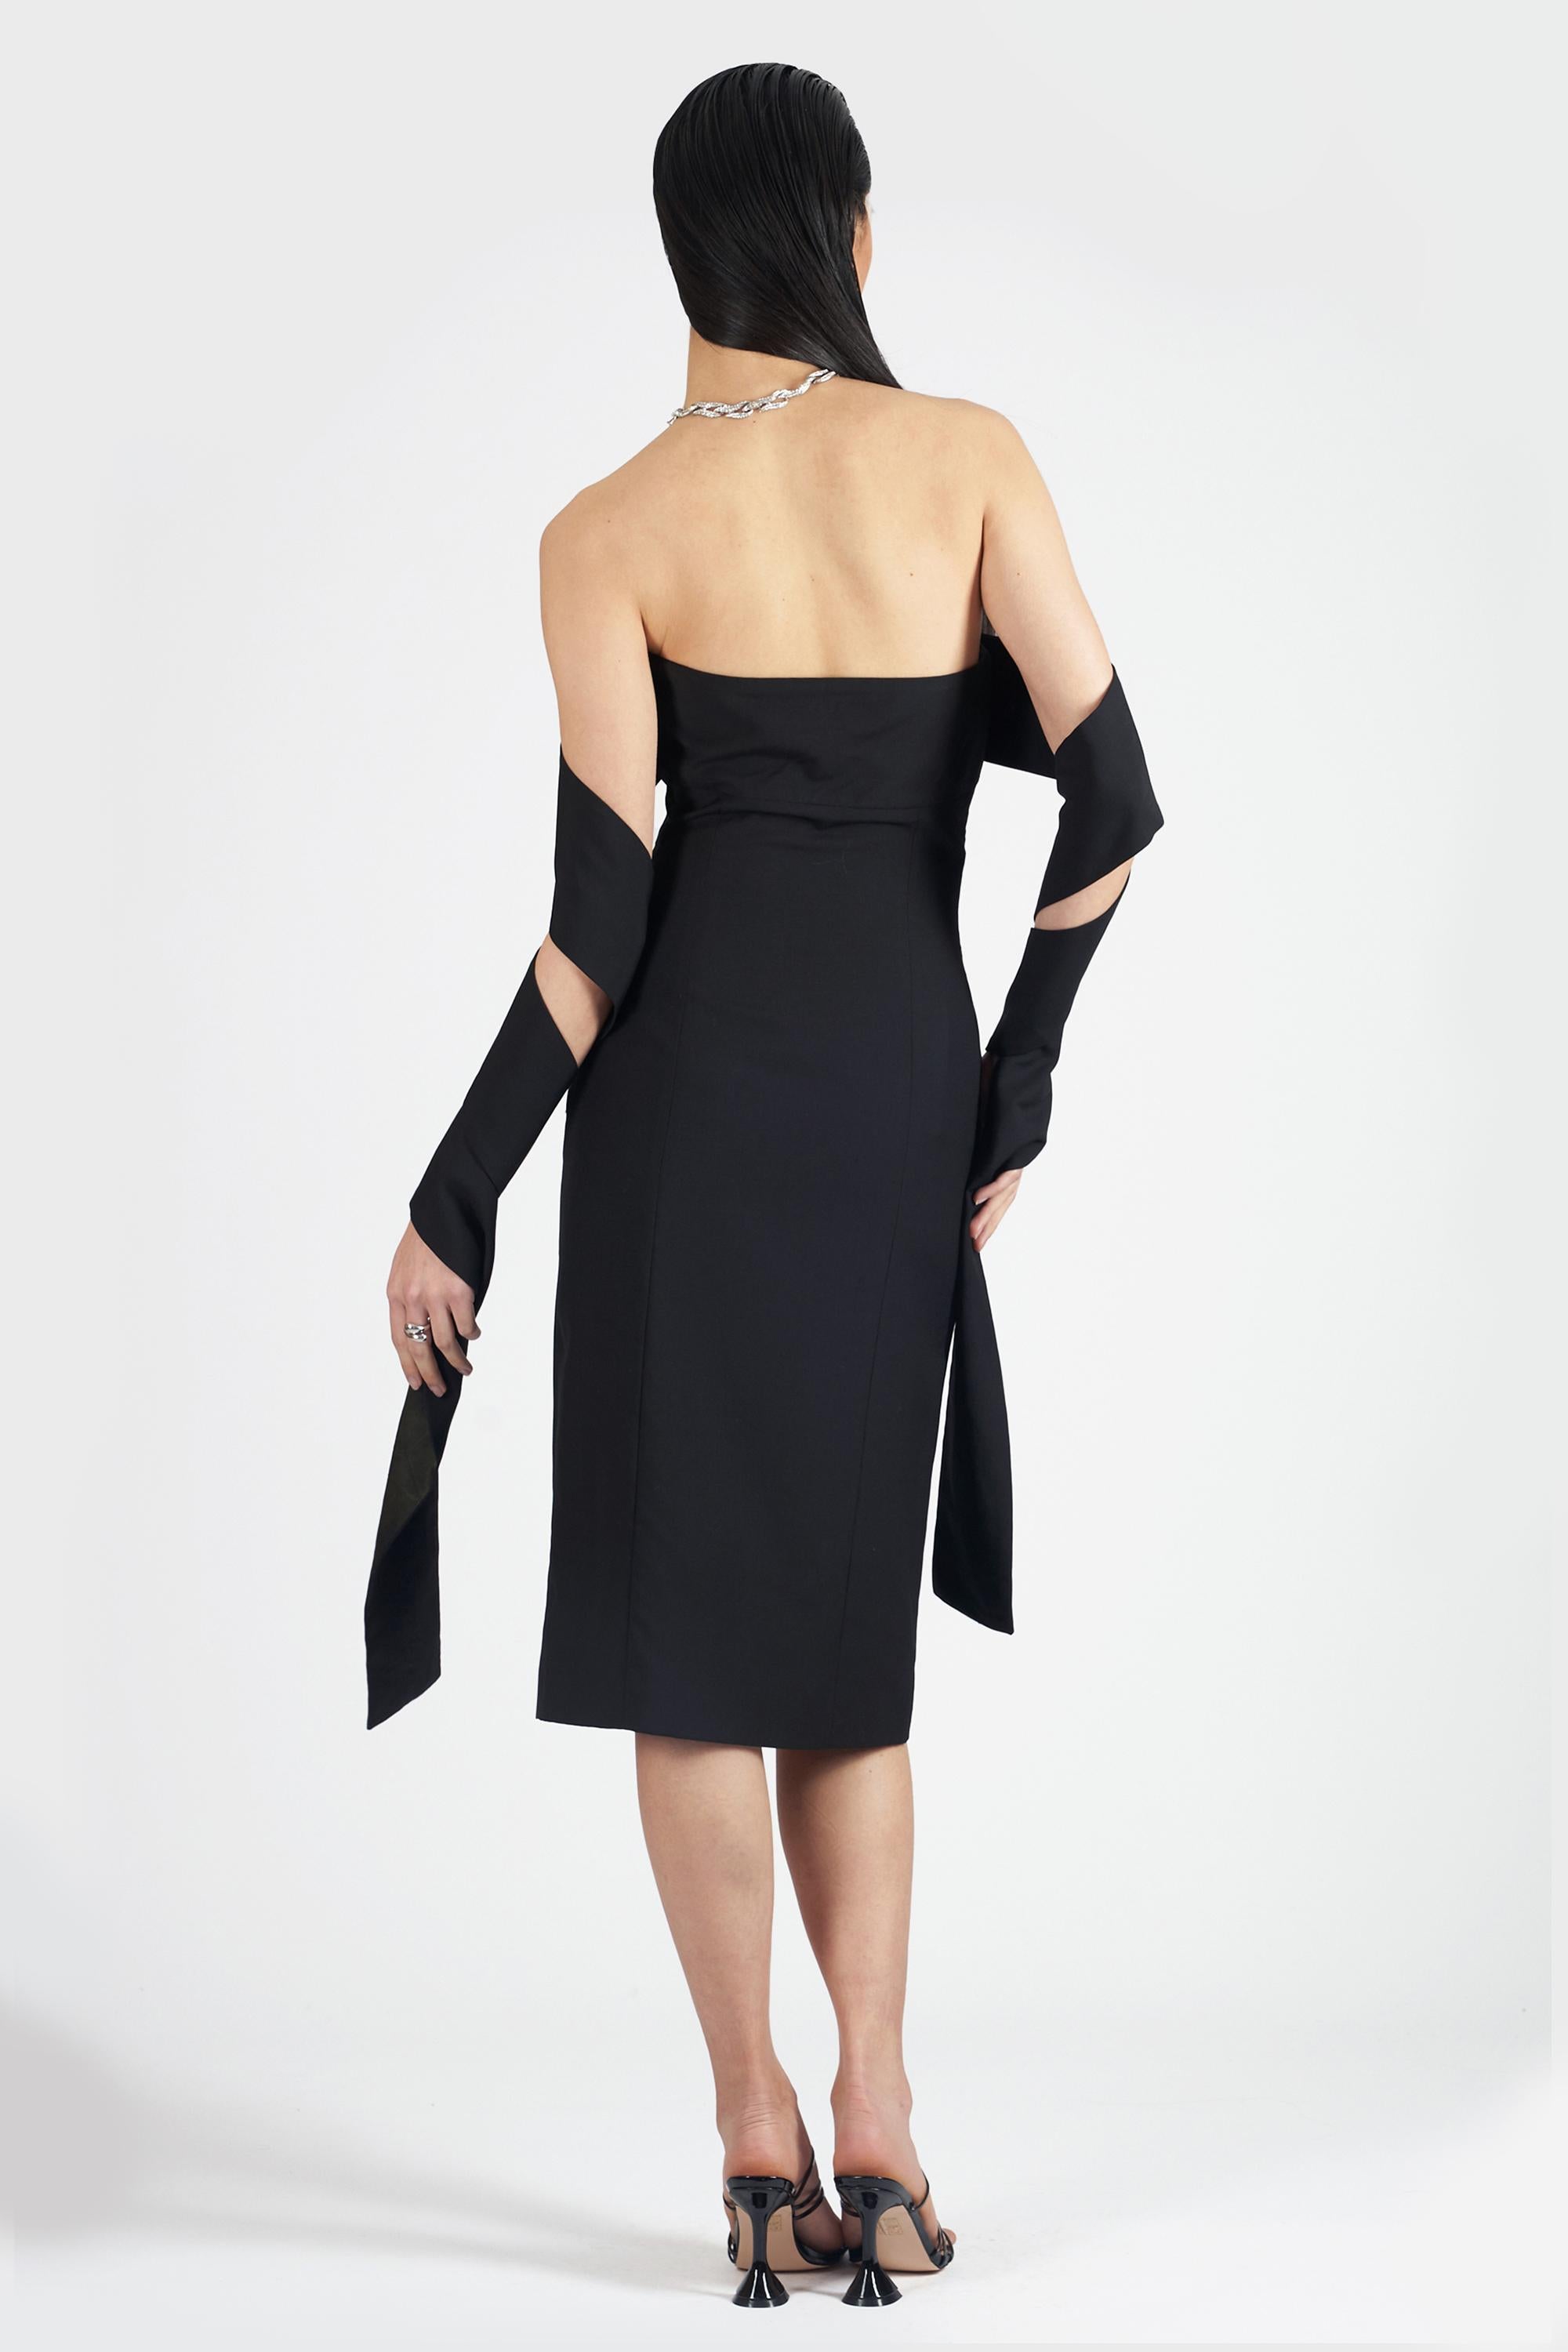 We are incredibly excited to present this rare Alexander McQueen Spring Summer 2001 ‘Voss’ collection strapless black dress. Features bandeau neckline, arm sash, zip side closure and midi length. In excellent vintage condition. Authenticity